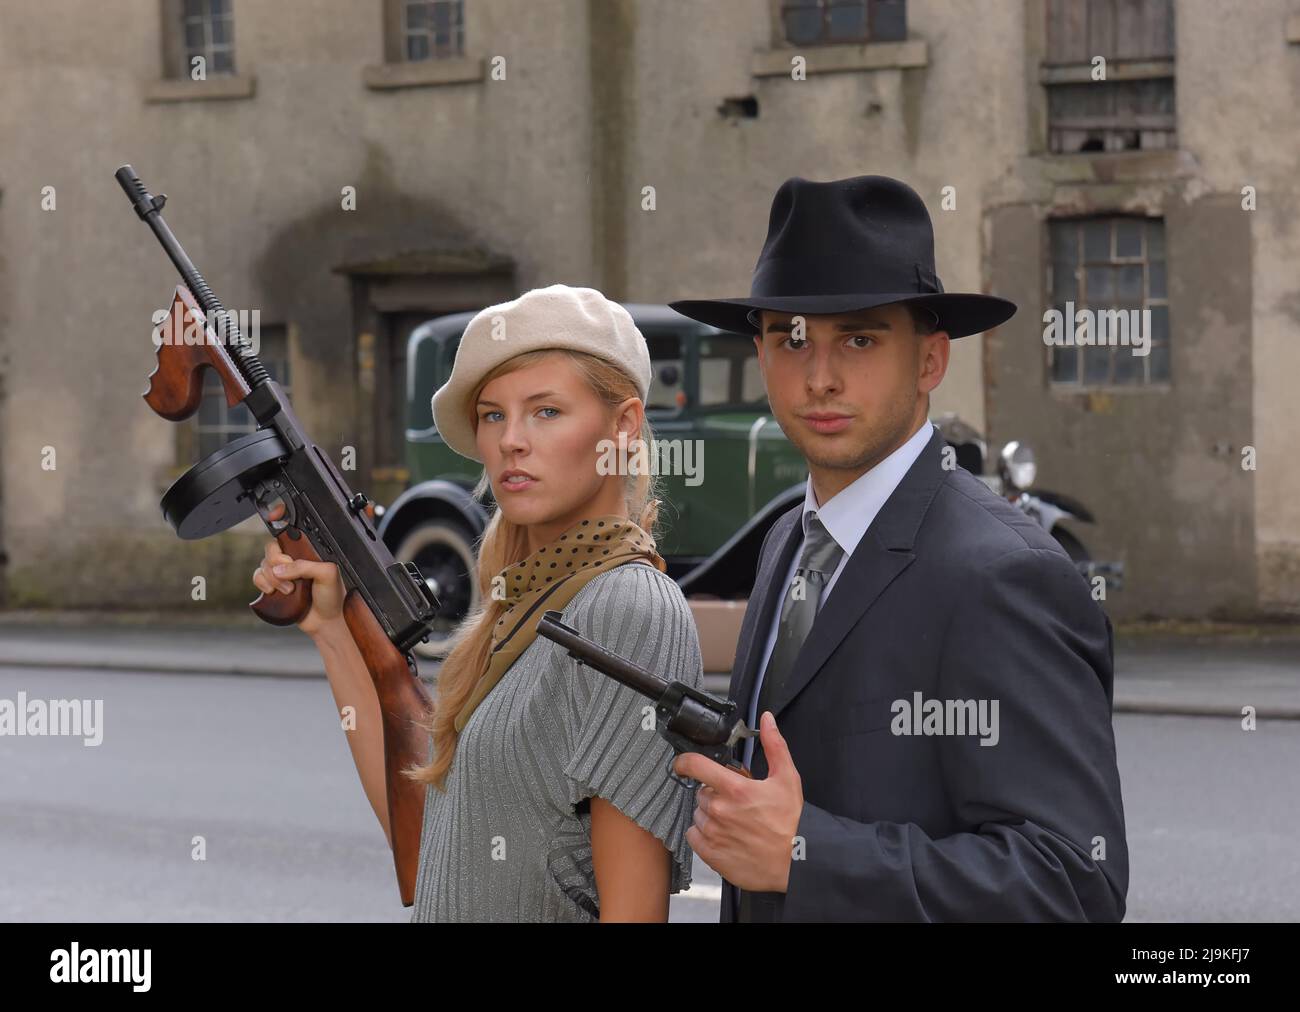 A young couple get dressed up in 1930 style  clothing. They each carry a weapon and act the role of the gangster  duo Bonnie and Clyde. Stock Photo